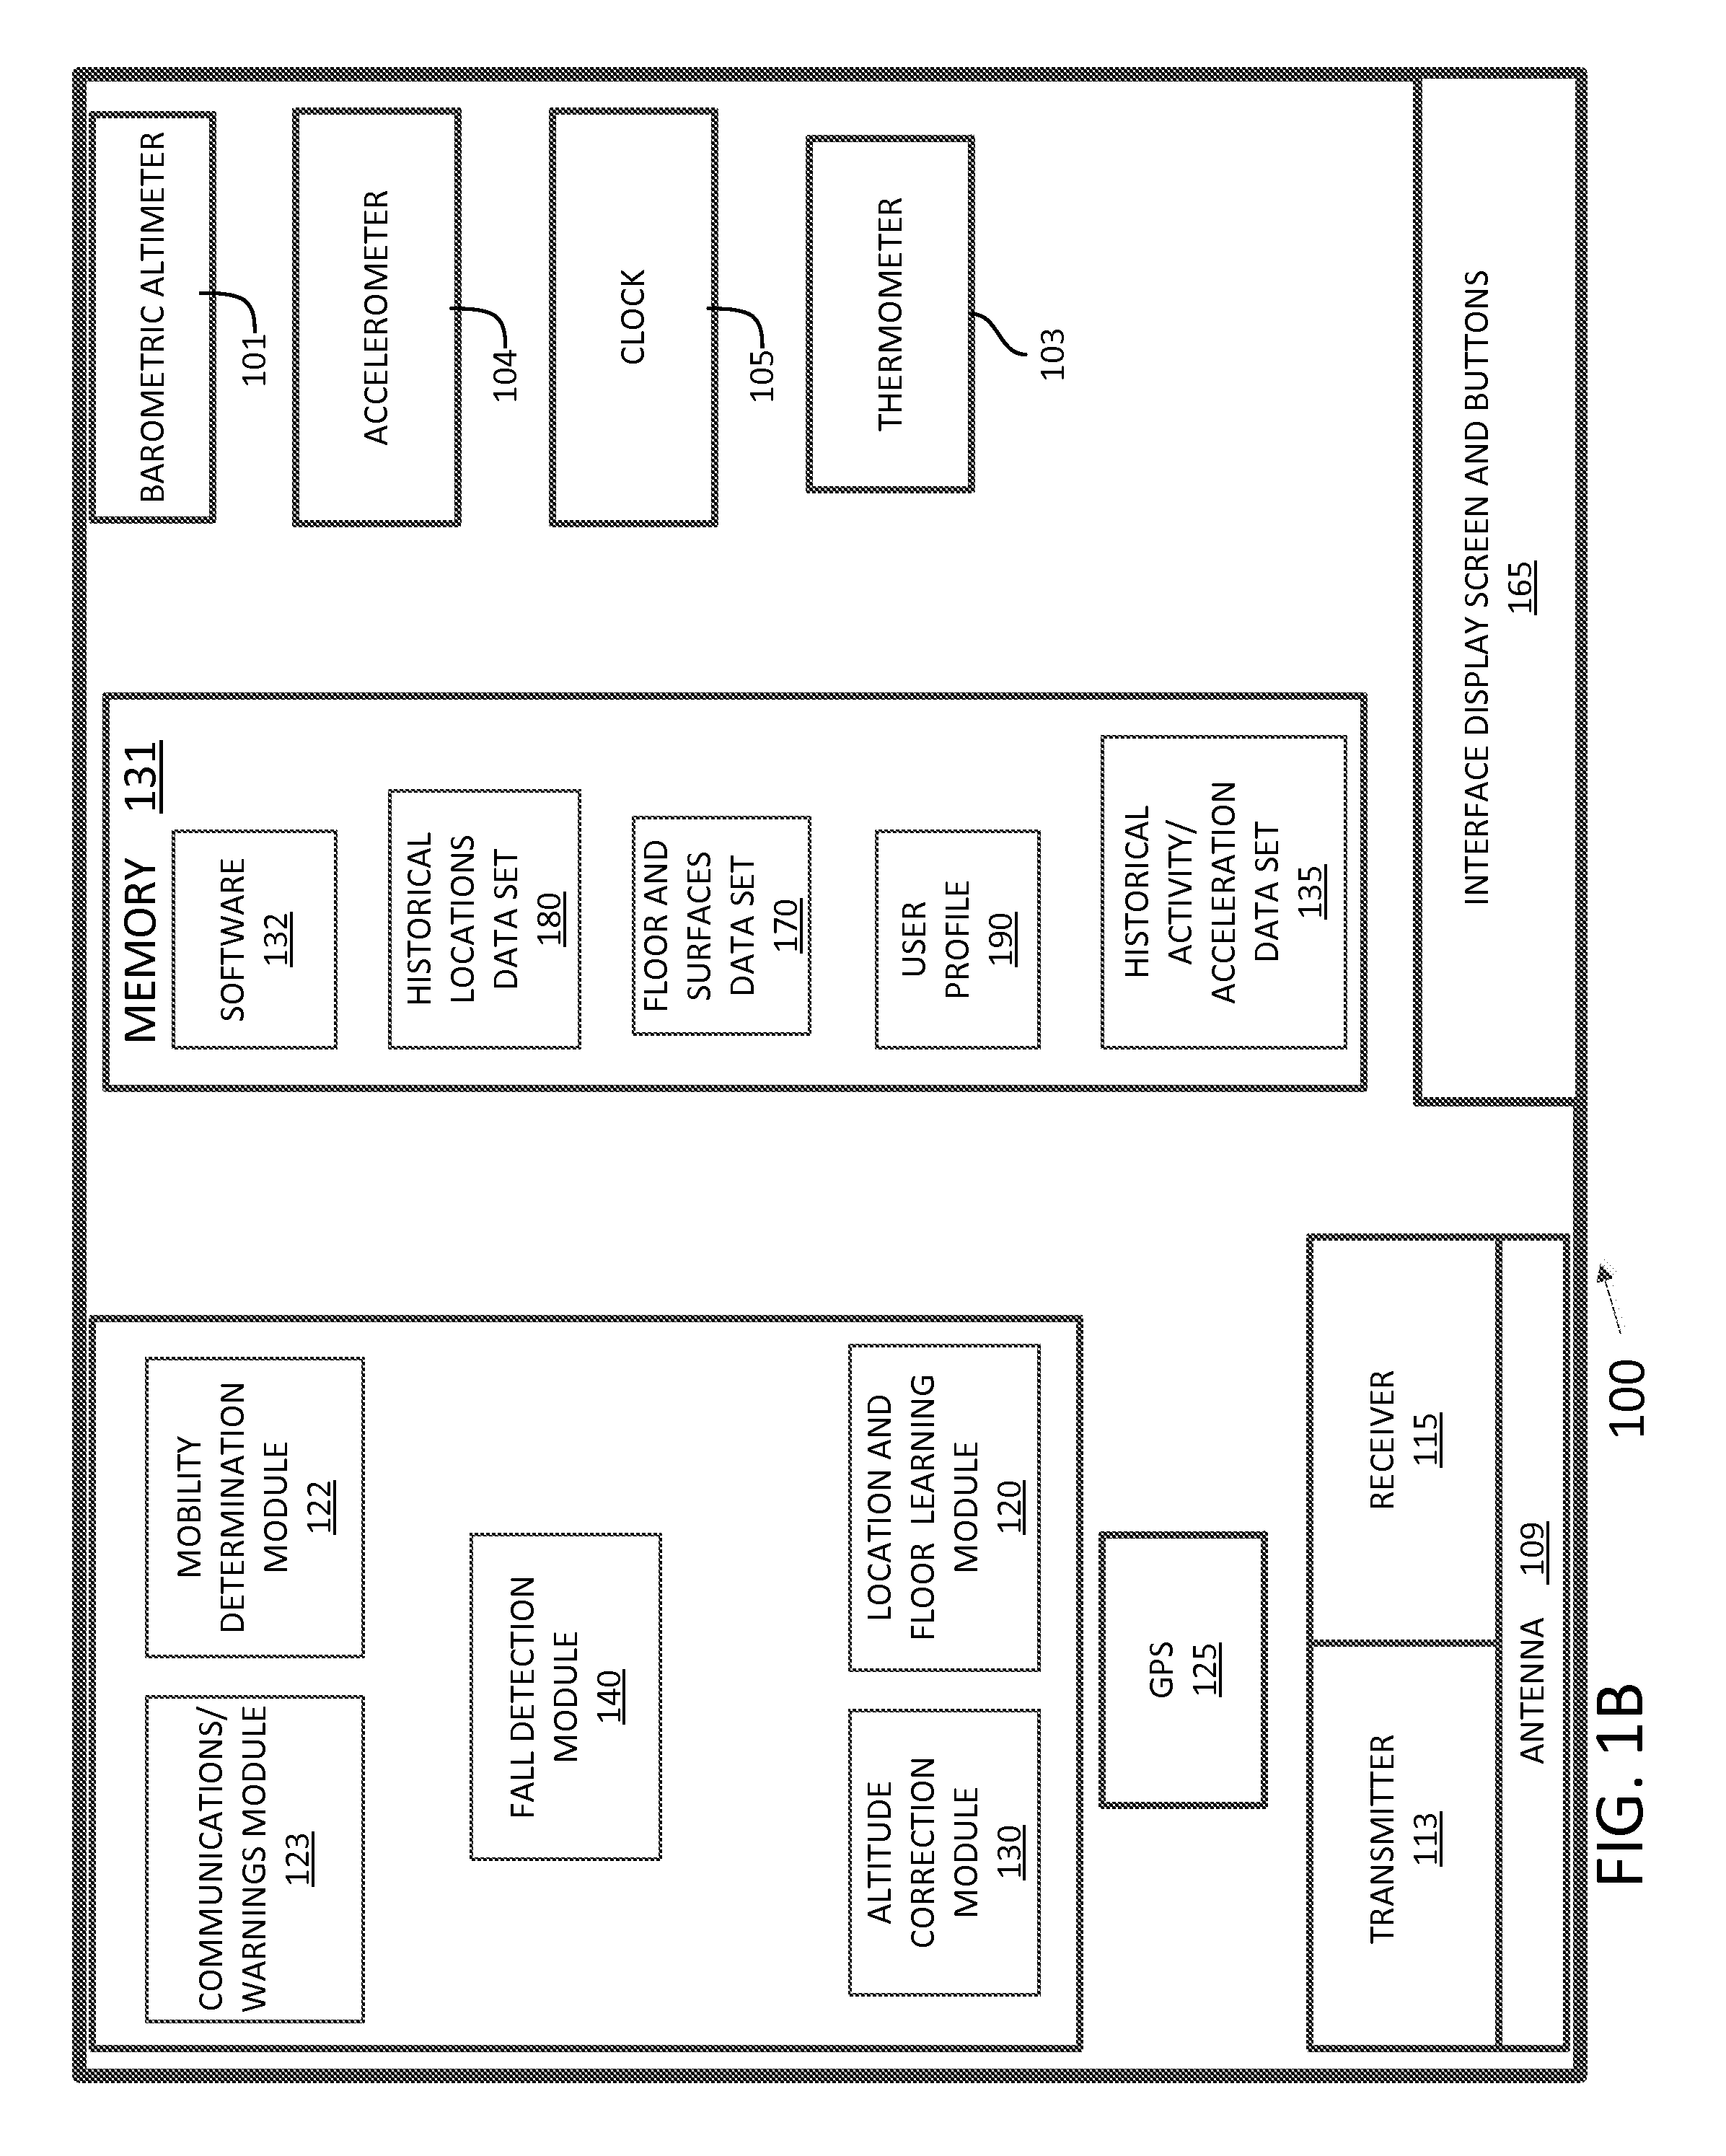 Fall detection apparatus with floor and surface elevation learning capabilites